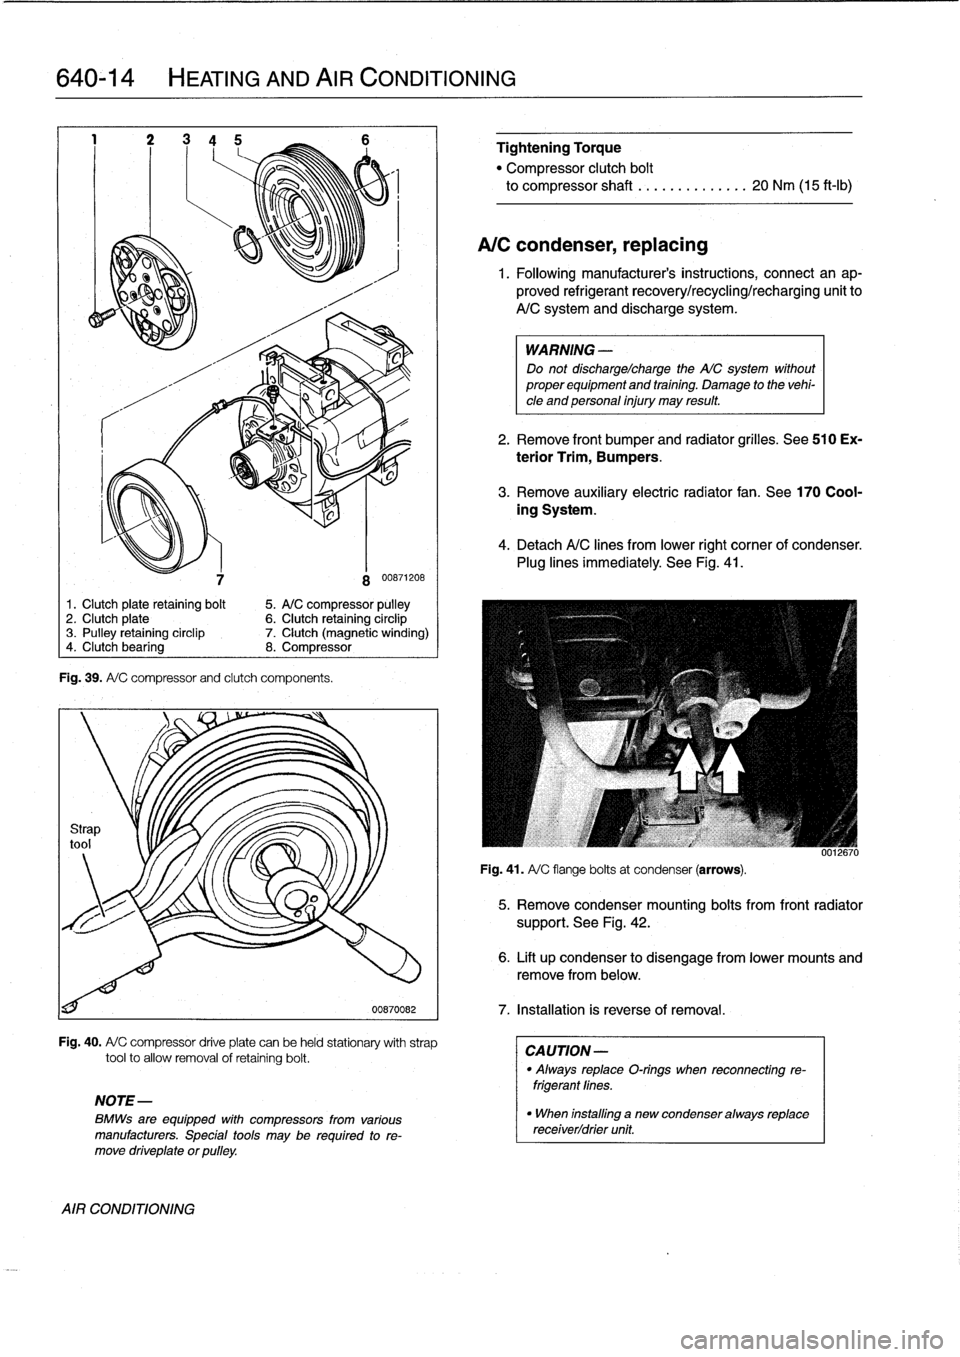 BMW M3 1994 E36 Owners Manual 
640-14

	

HEATING
AND
AIR
CONDITIONING

7
Fig
.
39
.
A/
C
compressorand
clutch
components
.

8
00871208

1.
Clutch
plate
retaining
bolt

	

5
.
A/C
compressor
pulley
2
.
Clutch
plate

	

6
.
Clutch
